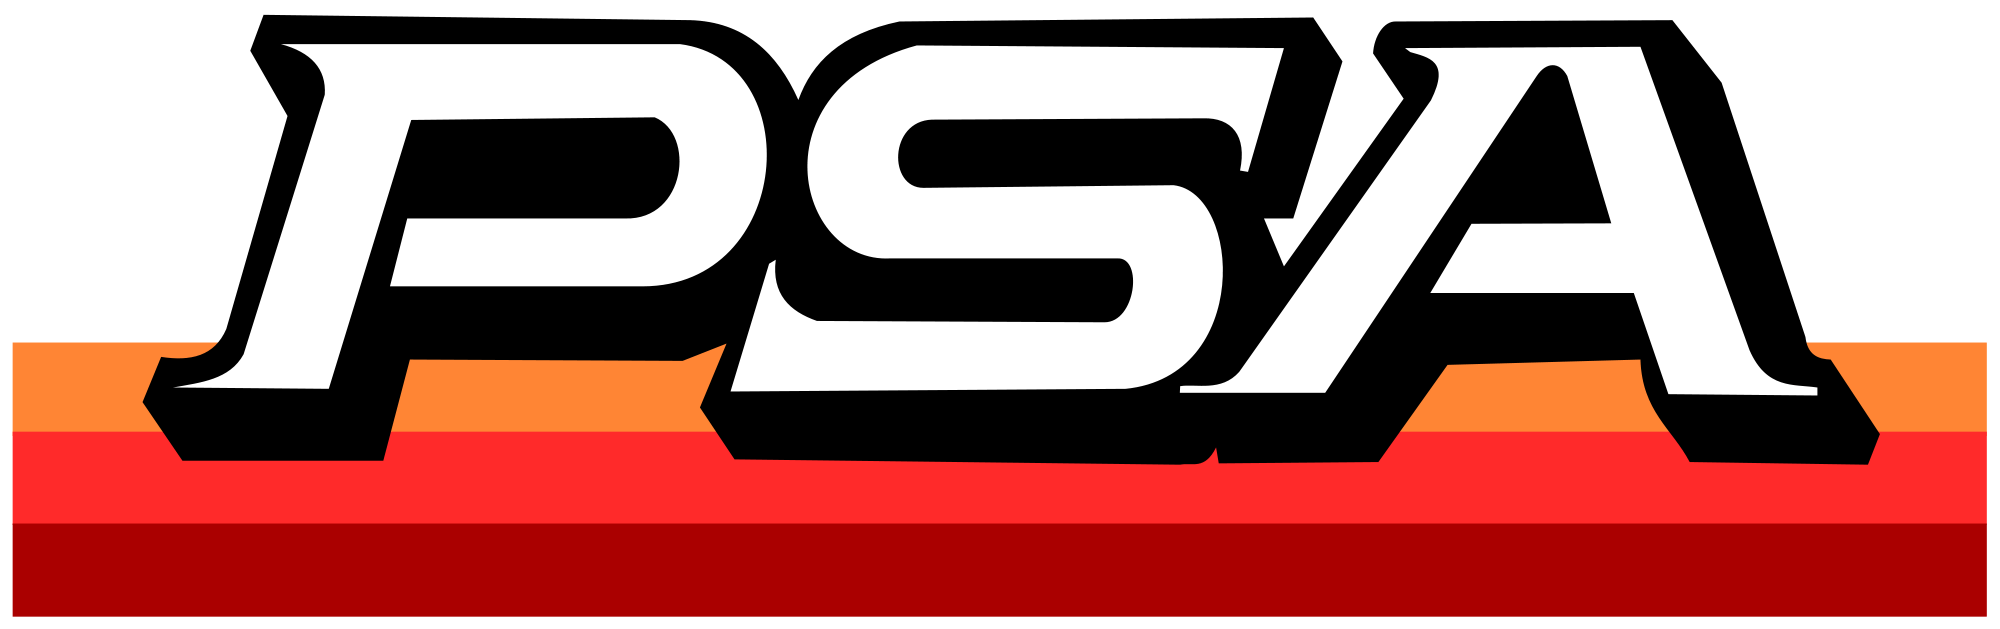 South West Airlines Logo - PSA Airlines Logo.svg